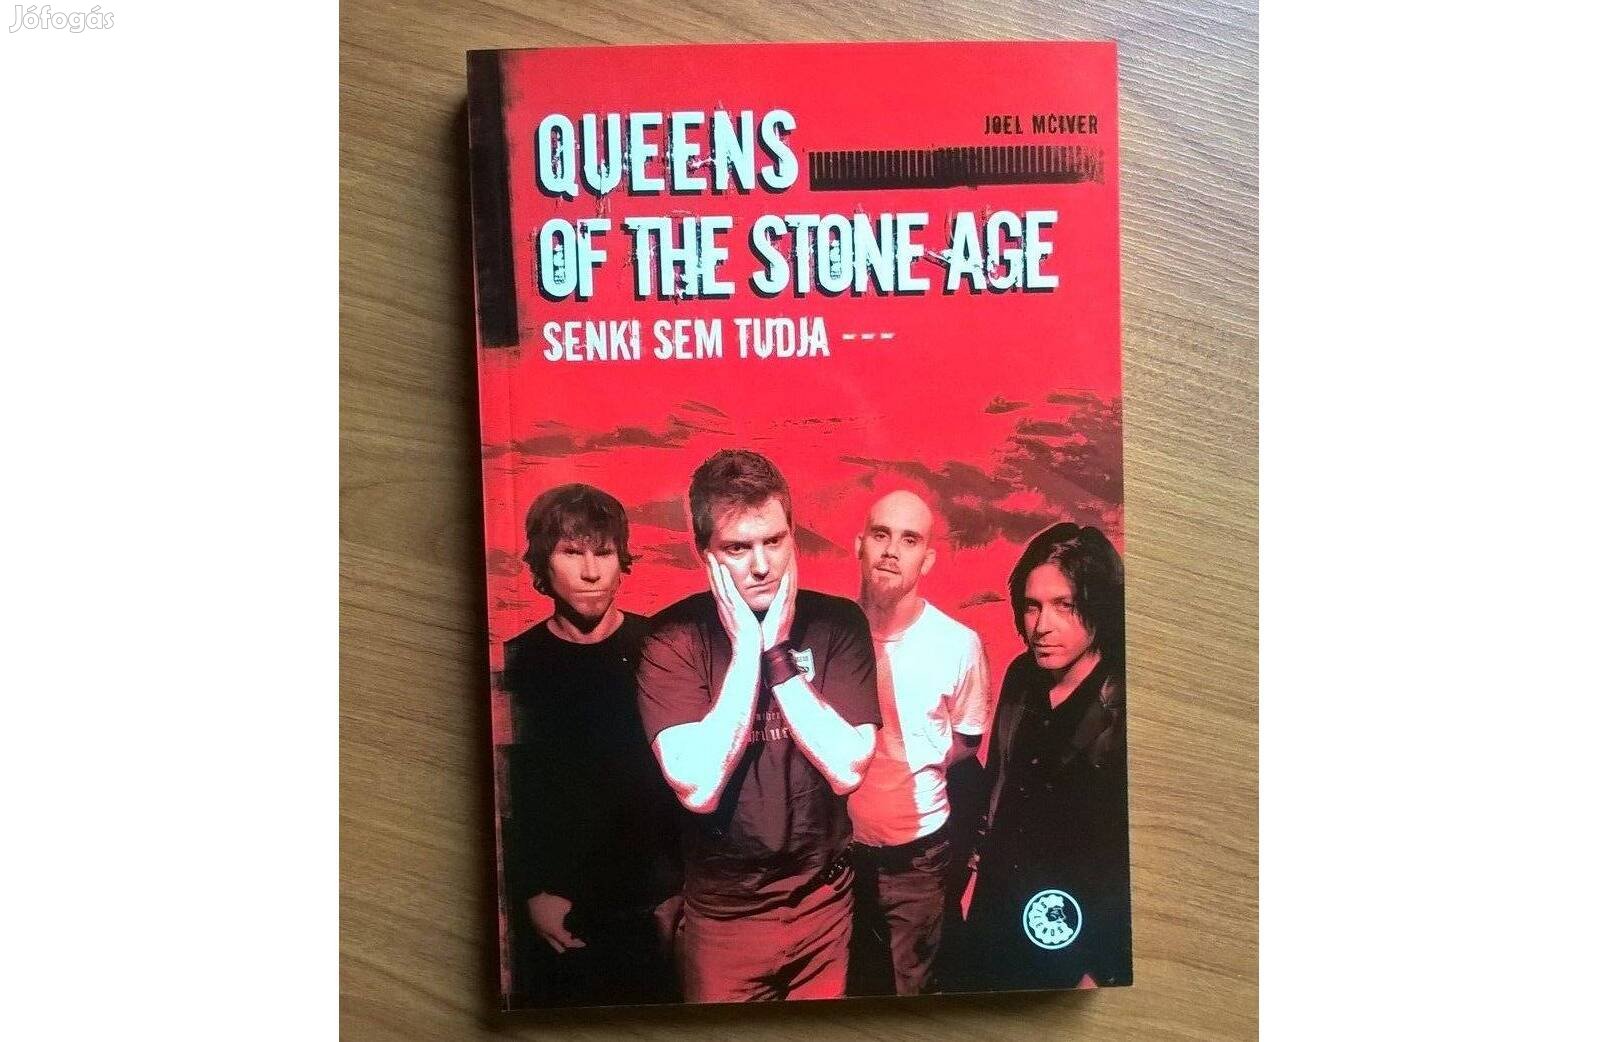 Joel Mciver - Queens Of The Stone Age